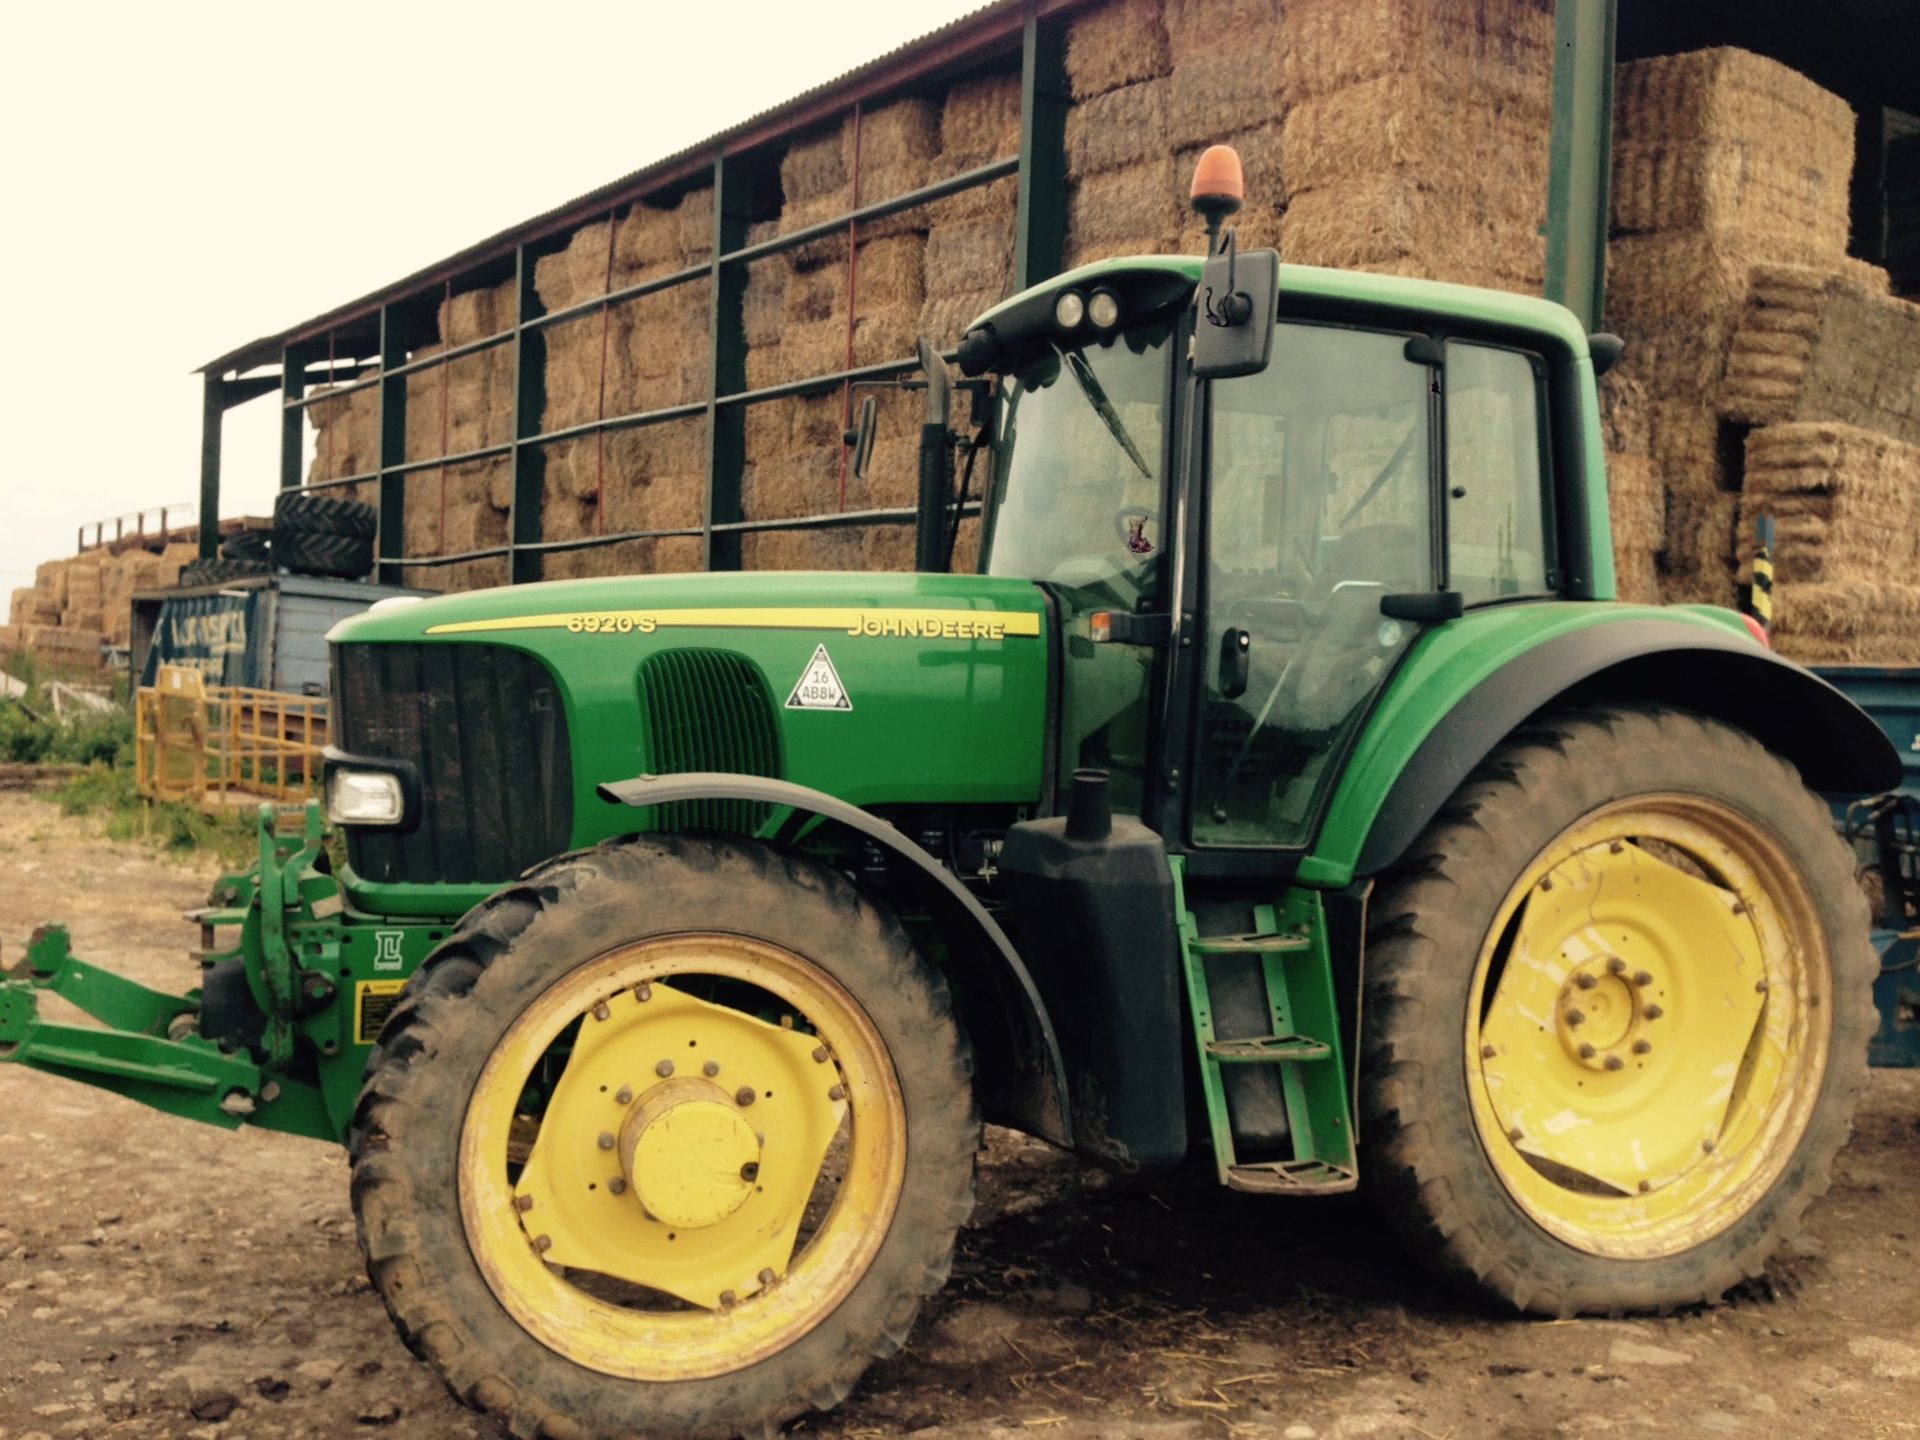 2005 John Deere 6920S Tractor 50k Power Quad c/w front linkage & pto. Location Bourne, Lincolnshire